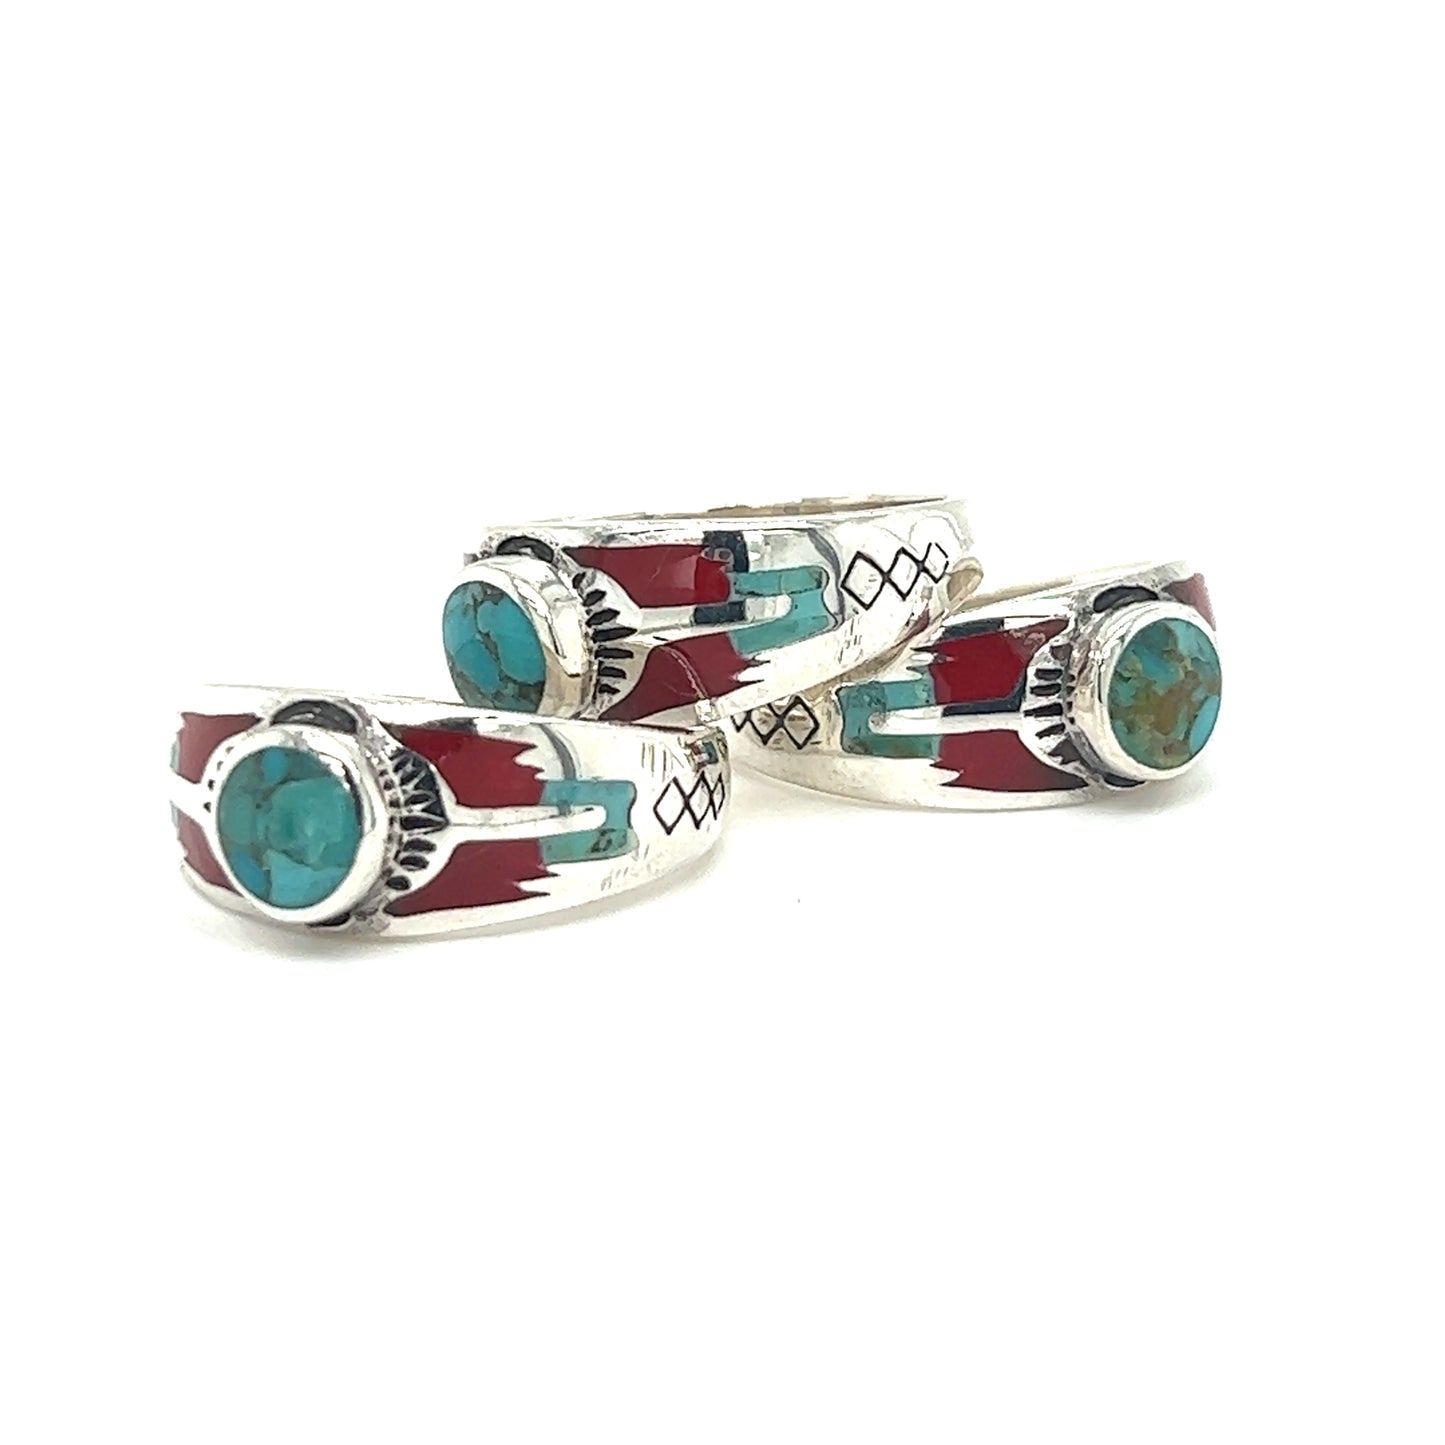 Three Super Silver Kingman Turquoise Composite Rings With Coral and Red.